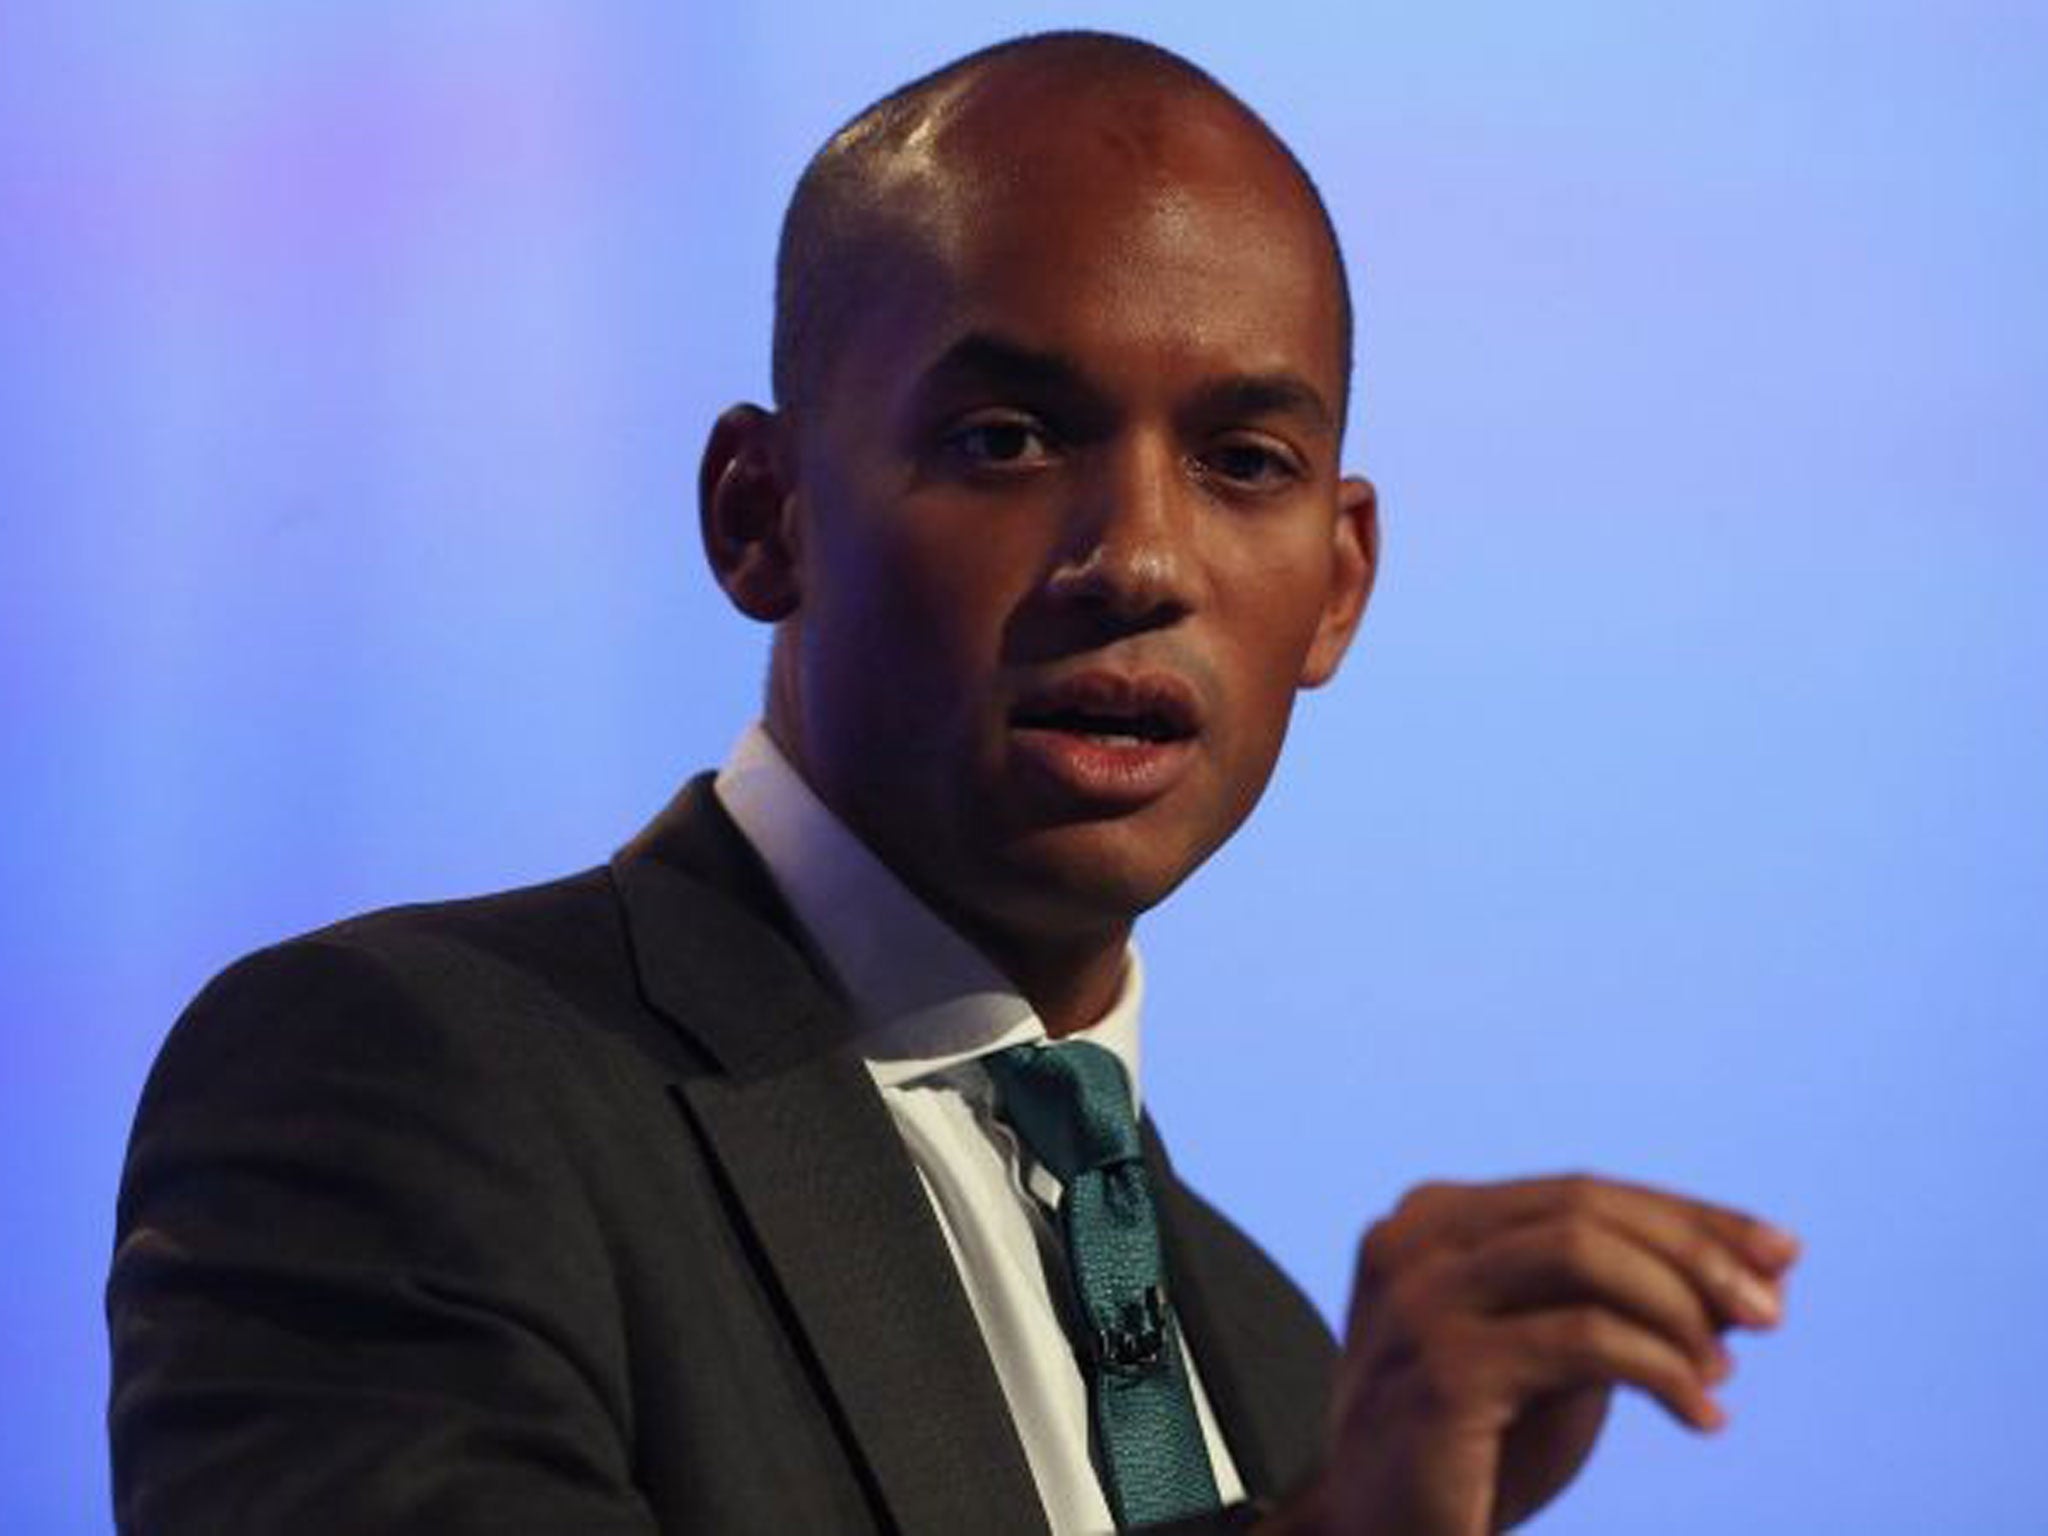 Labour's Chuka Umunna was unable to deny posting flattering updates to his own Wikipedia page